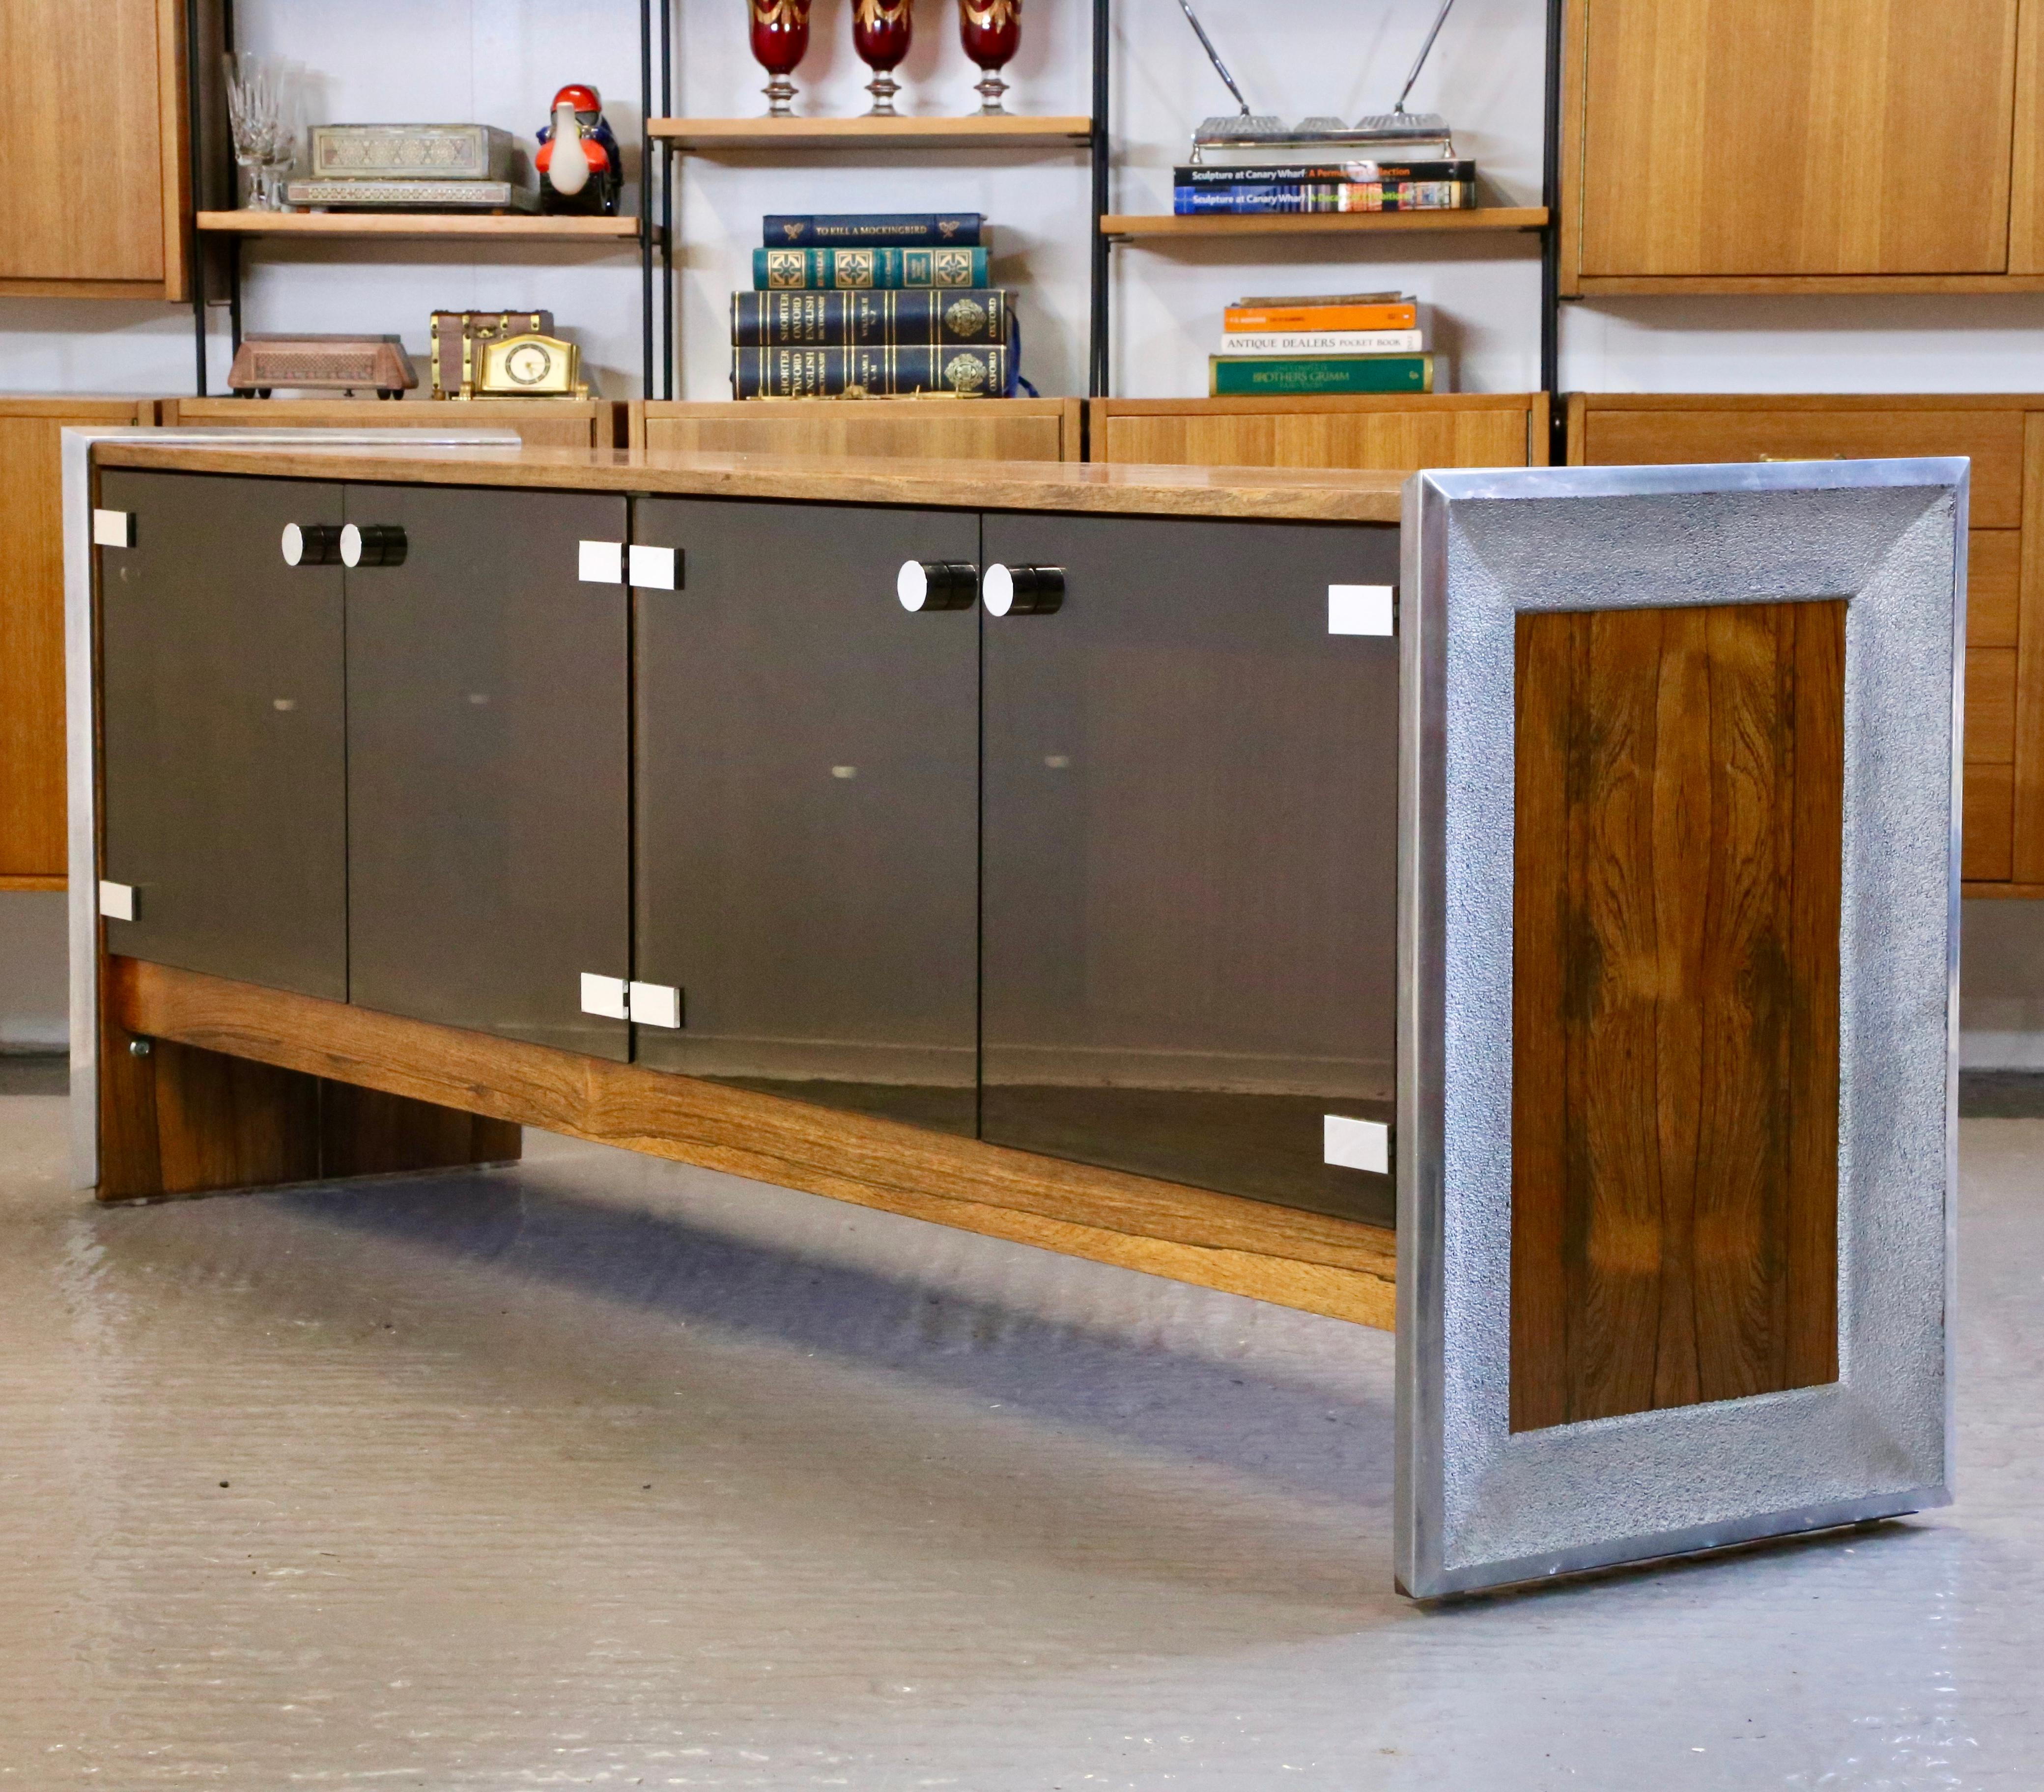 ‘Design, fine finishes and luxury materials are the unmistakable Merrow Associates hallmark’

A Rare Fine Mid Century Modern stylish sideboard, designed by Richard Young for Merrow Associates. The sideboard features high quality Rosewood, Chrome